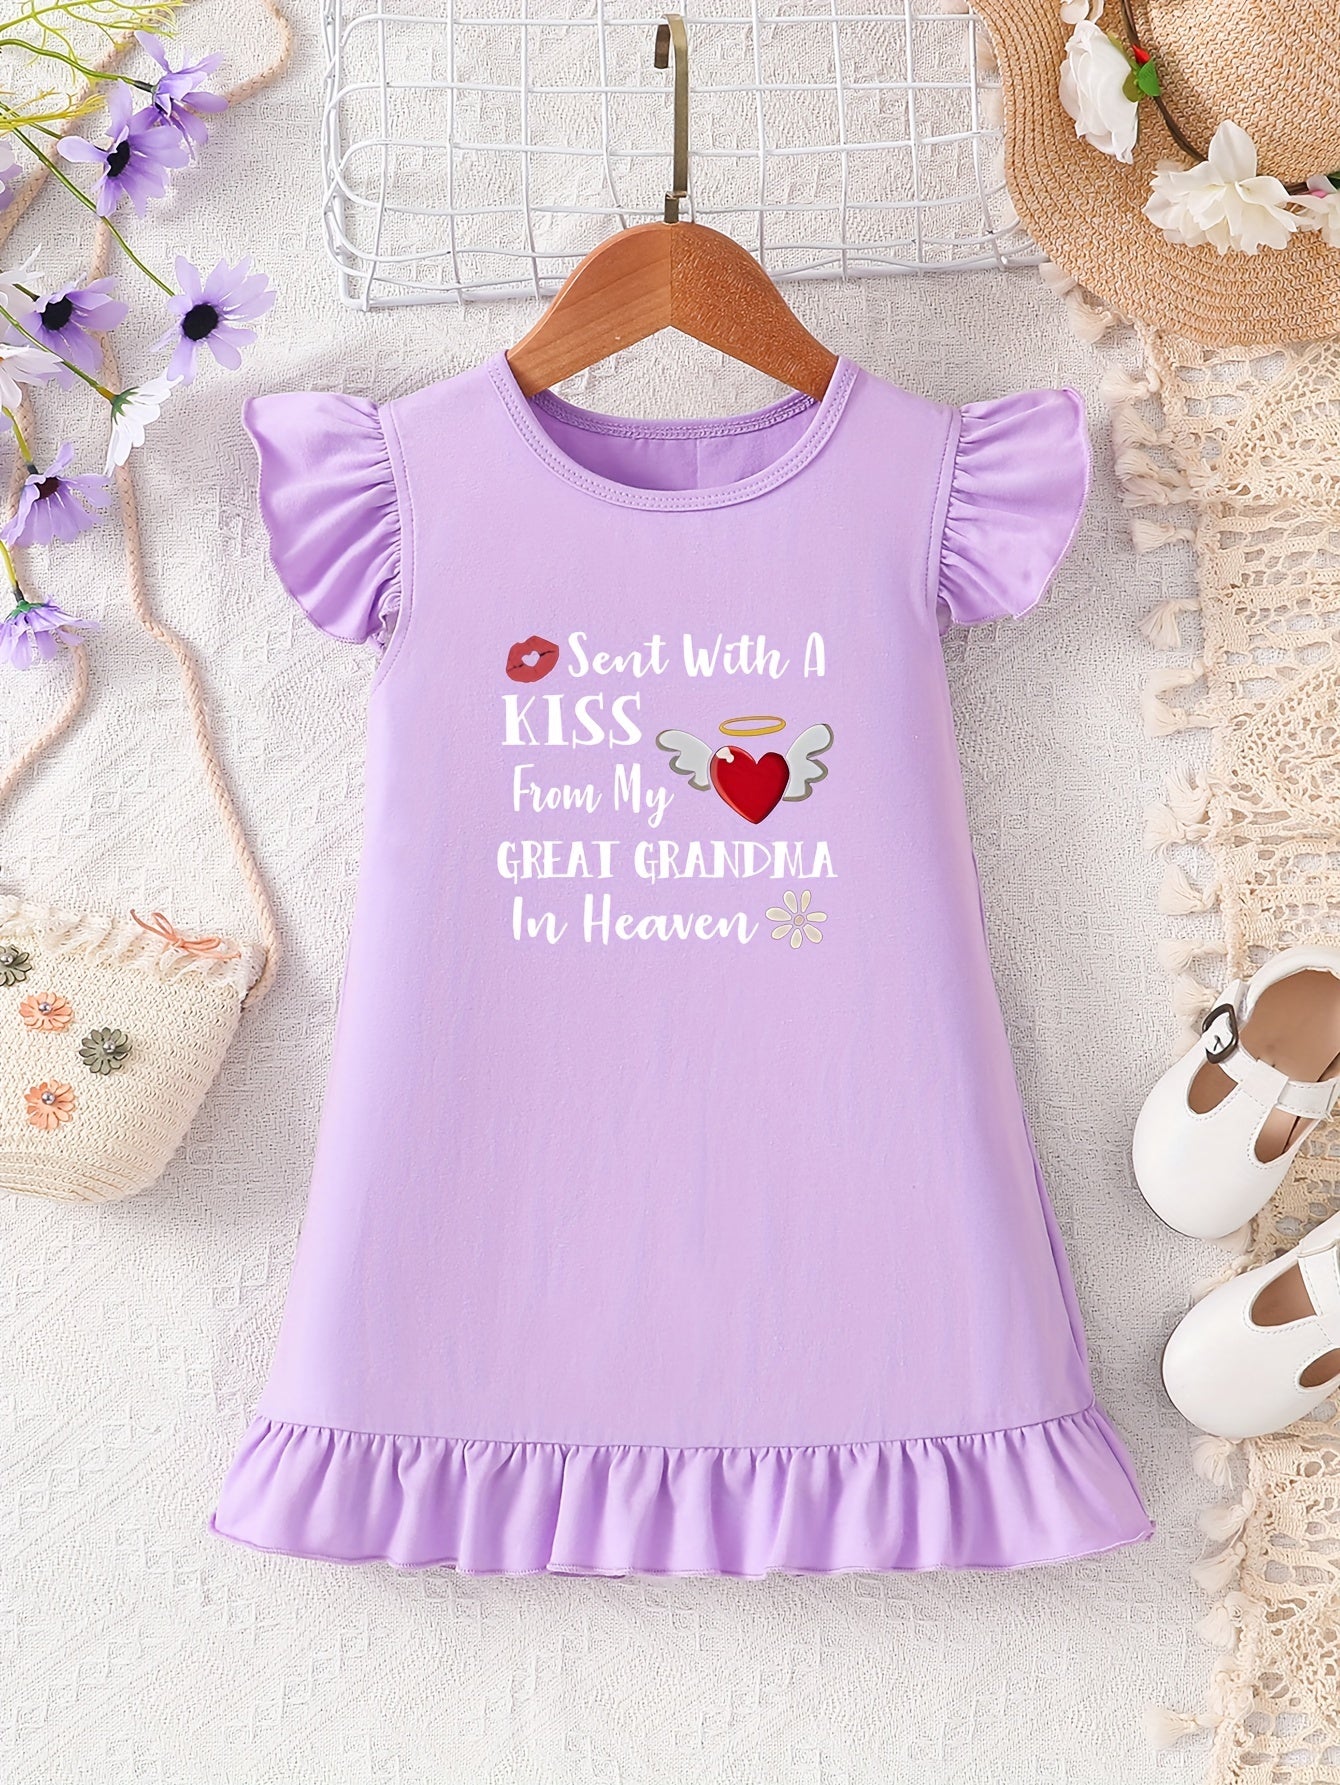 Sent With A Kiss From My Great Grandma In Heaven Christian Toddler Dress claimedbygoddesigns